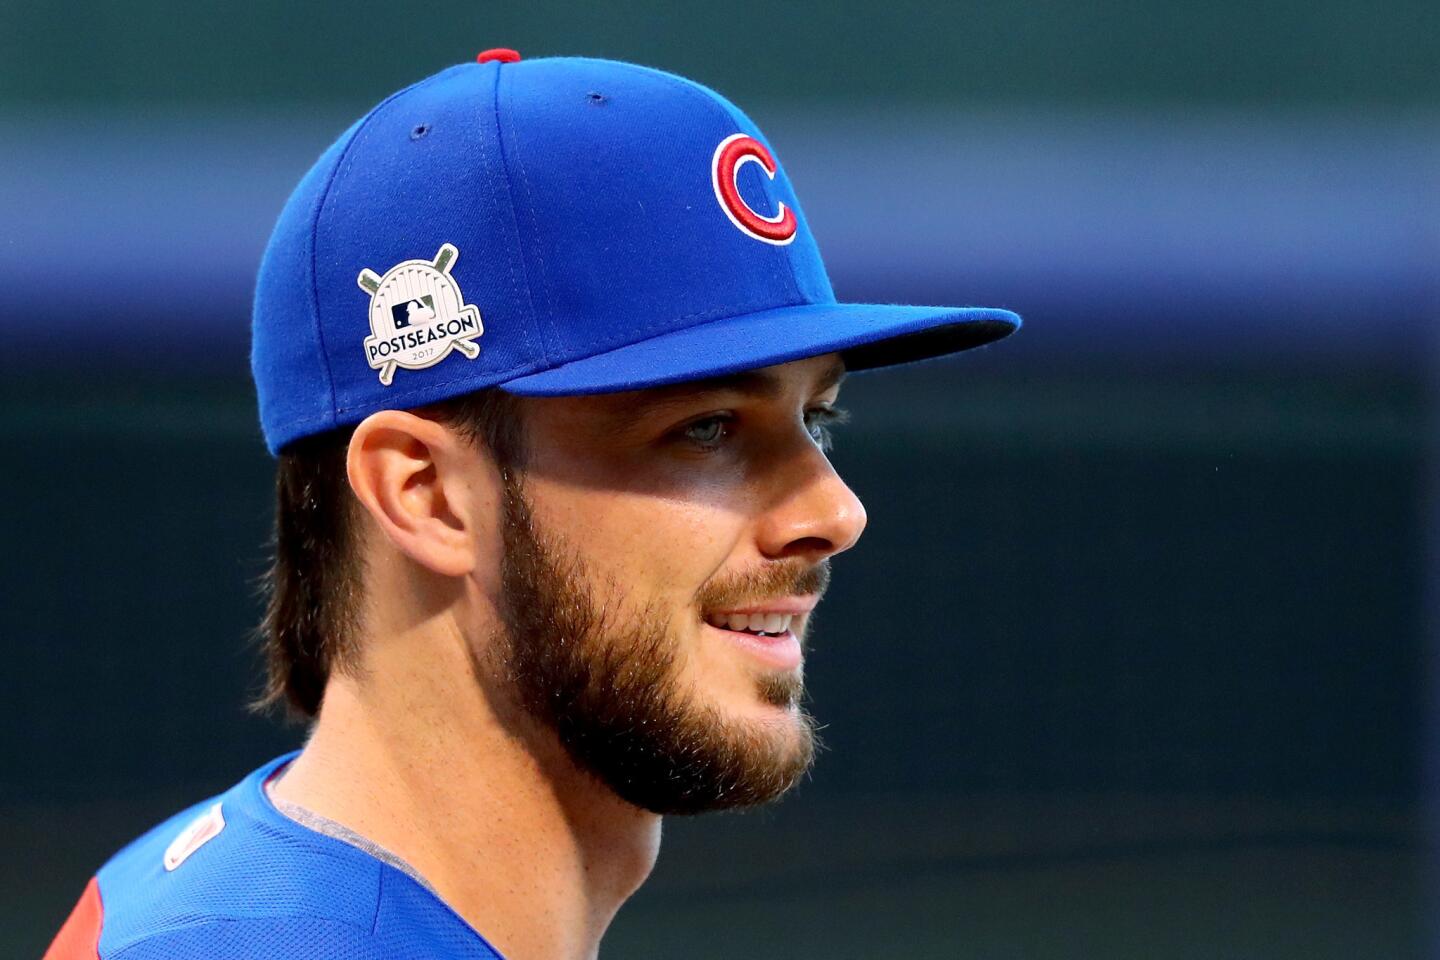 Kris Bryant looks on before Game 4 of the NLCS against the Dodgers at Wrigley Field on Oct. 18, 2017.